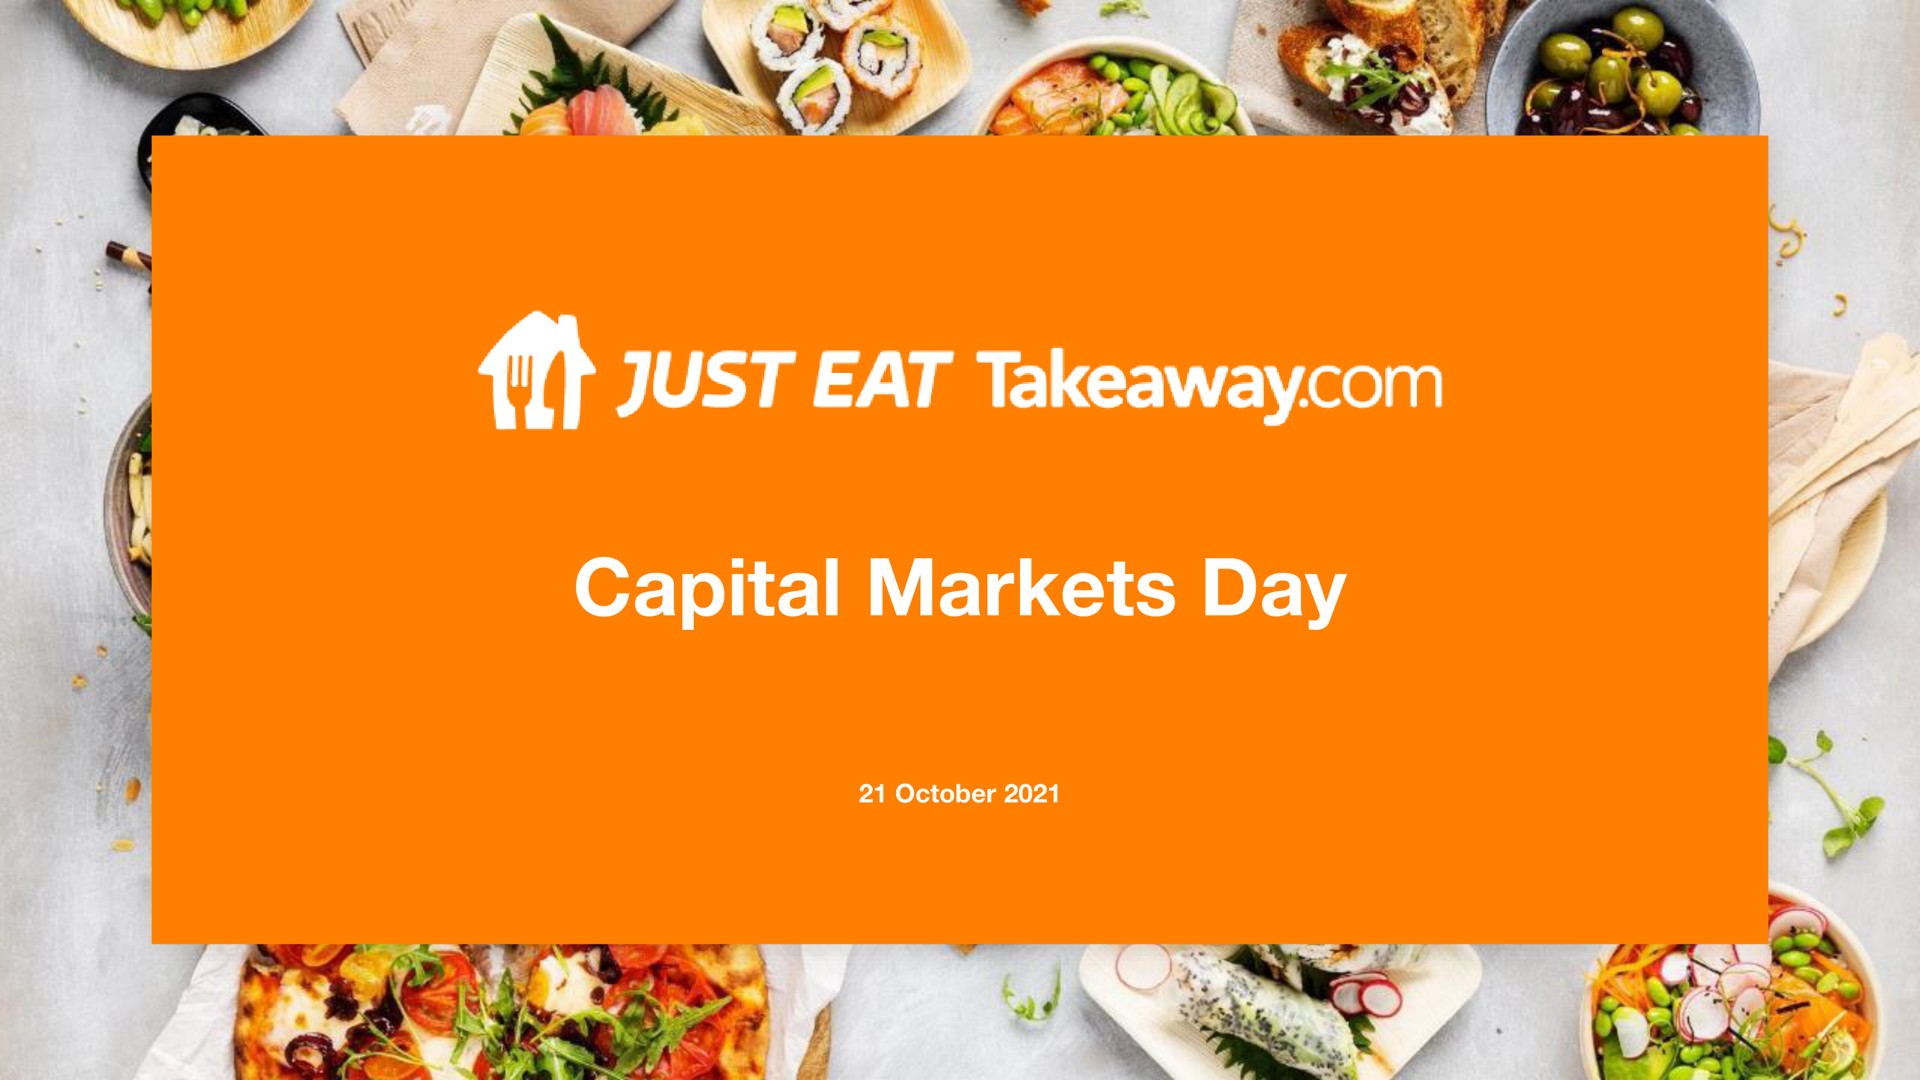 capital markets day just eat | Just Eat Takeaway.com